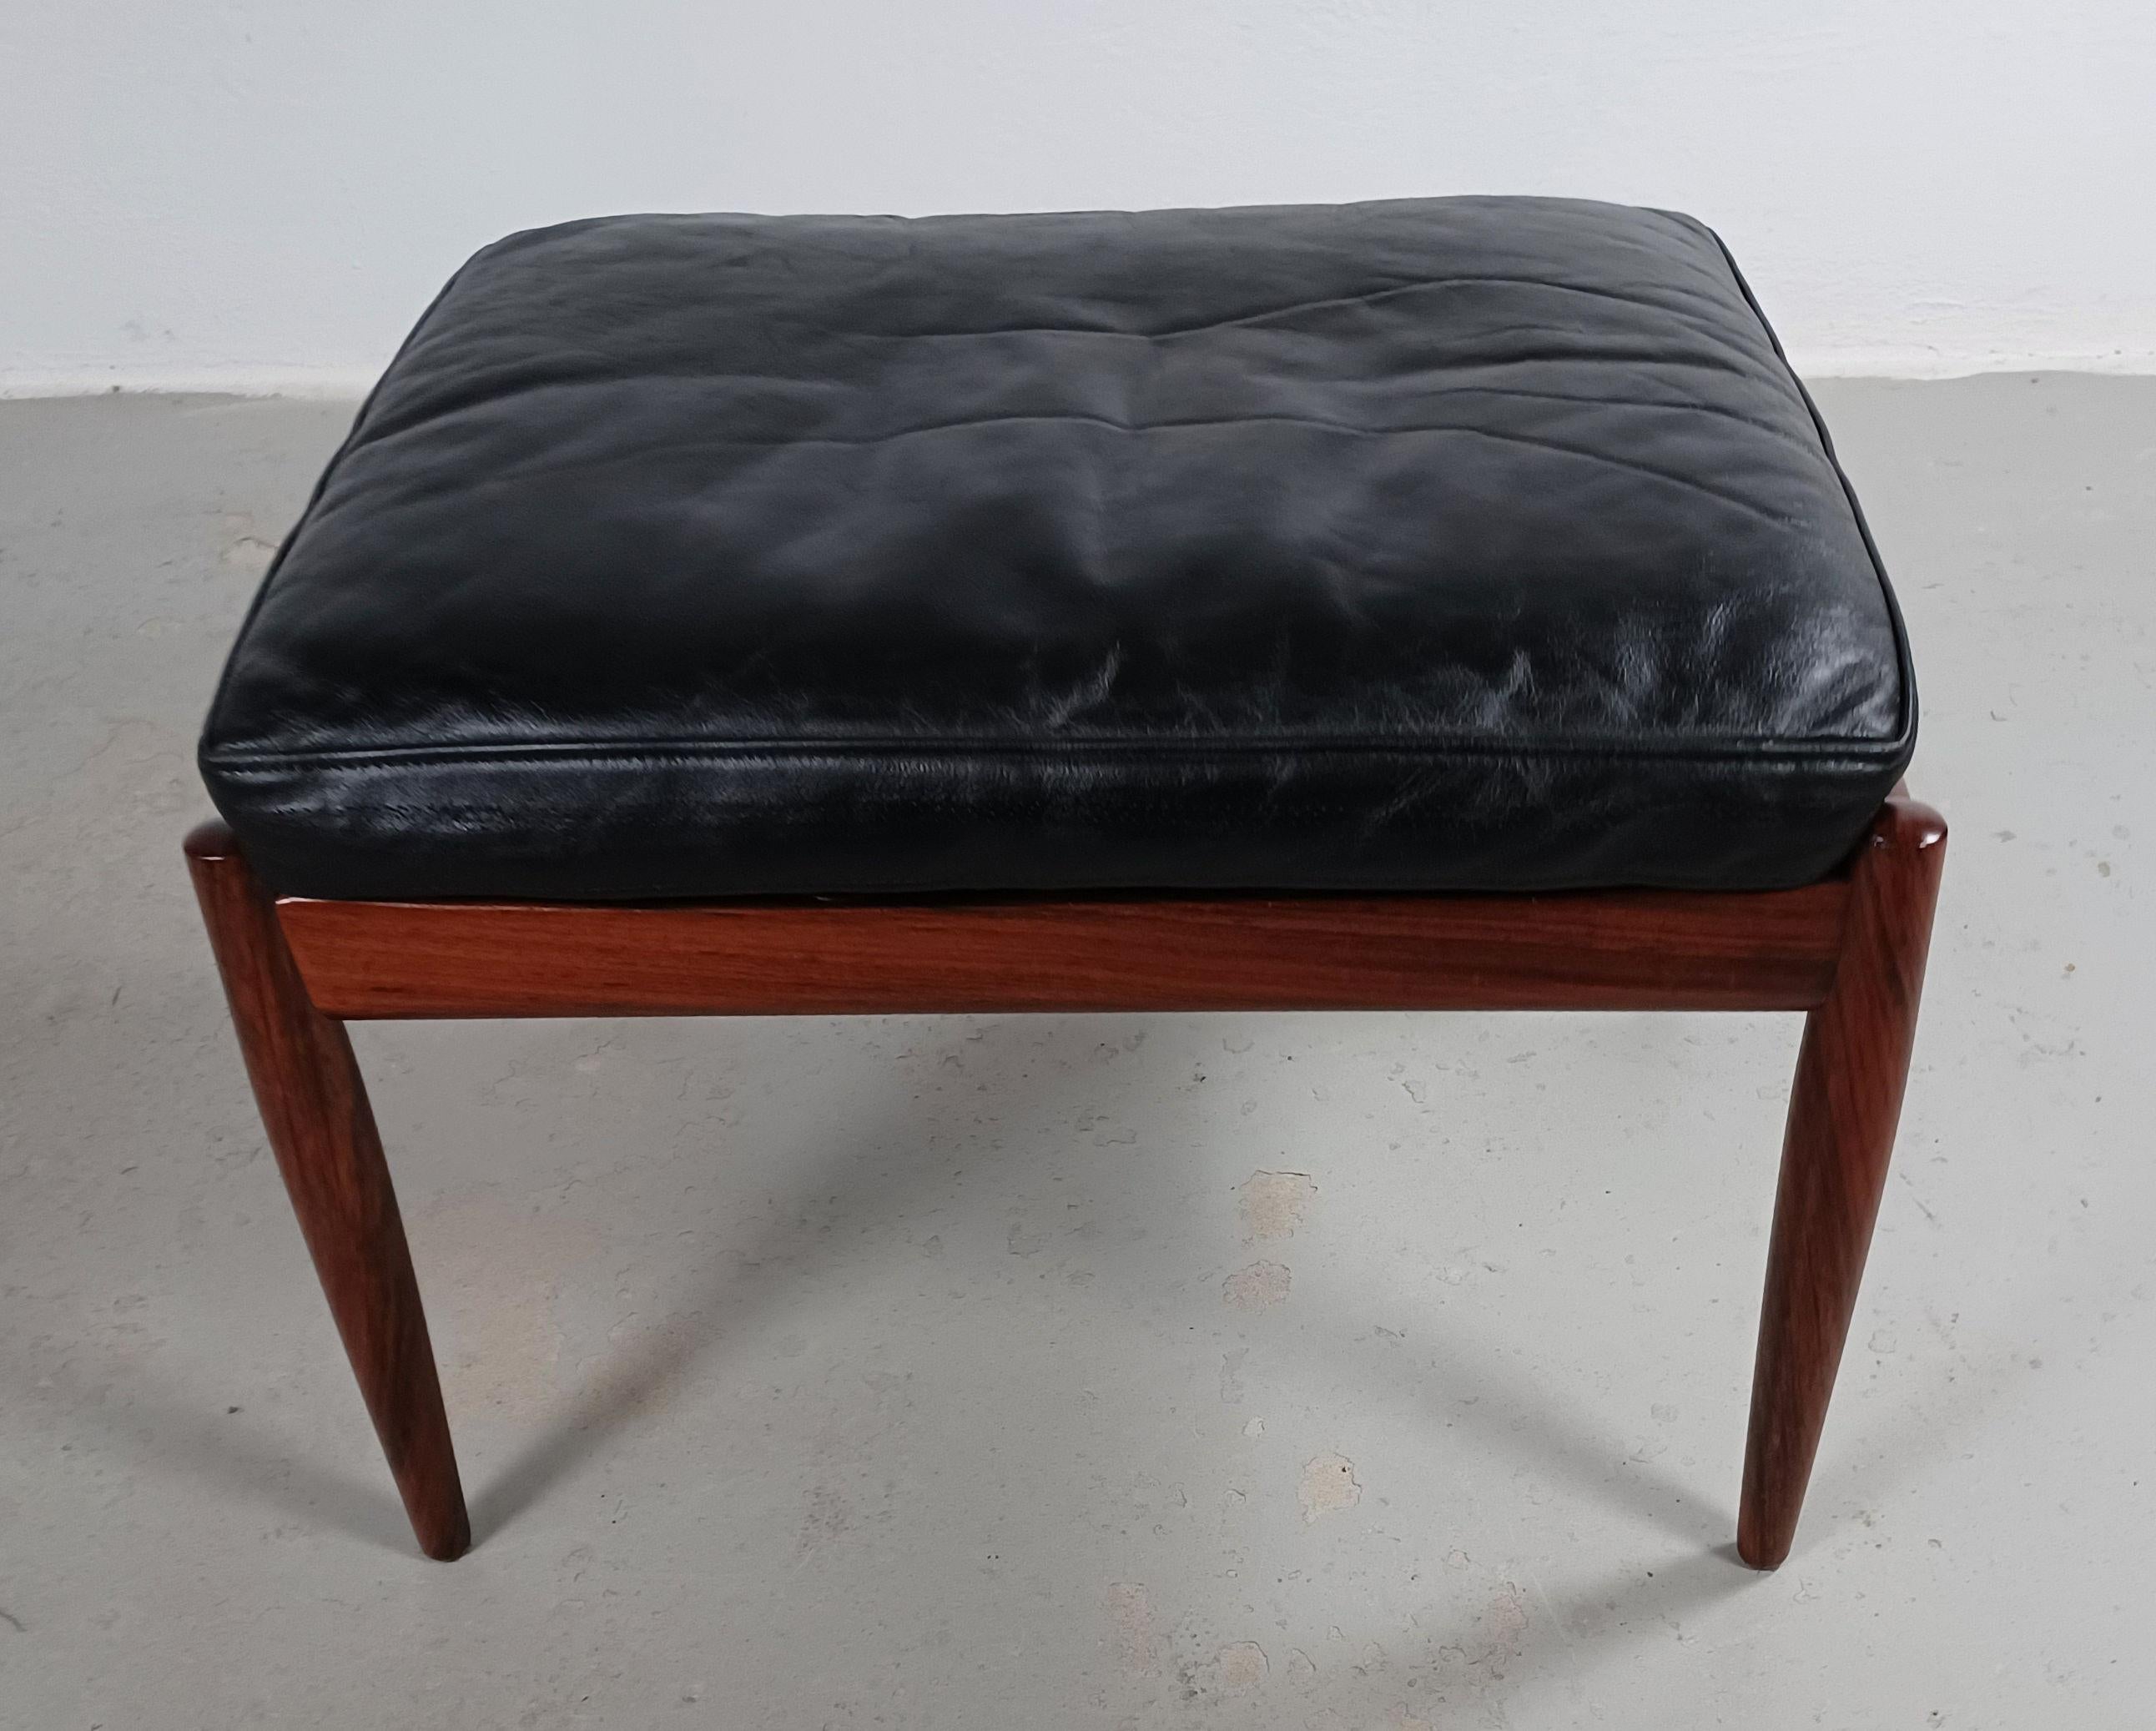 1960's Kai Kristiansen Fully Restored Model 121 Rosewood Footstool by Magnus Olesen.

The footstool was designed by and manufactored for the Kai Kristiansen iconic 